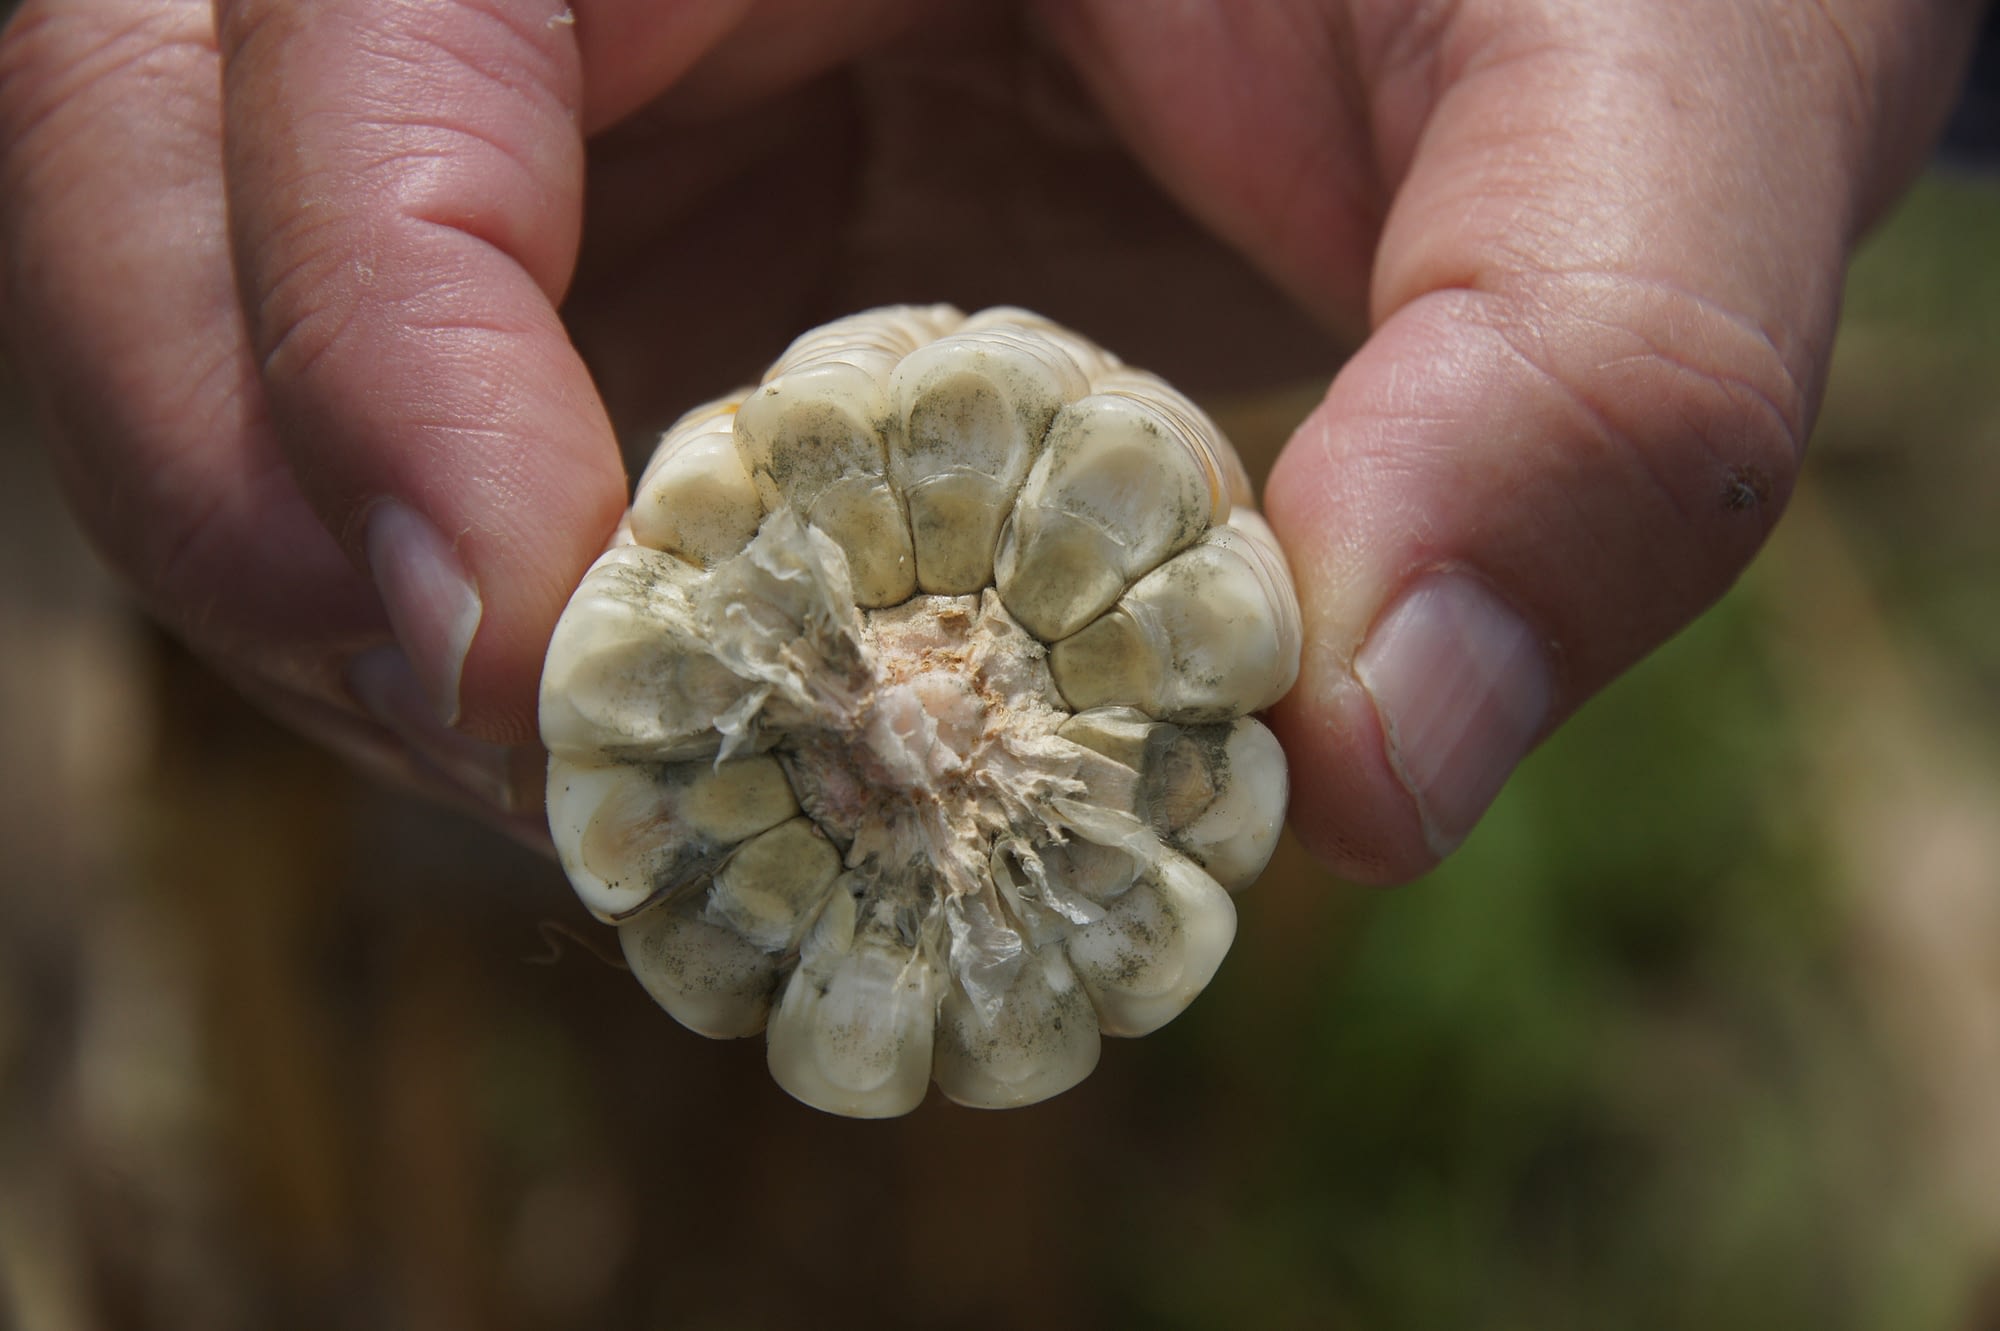 Maize infected with the fungus Aspergillus flavus, causing ear rot and producing aflatoxins. (Photo: George Mahuku/CIMMYT)